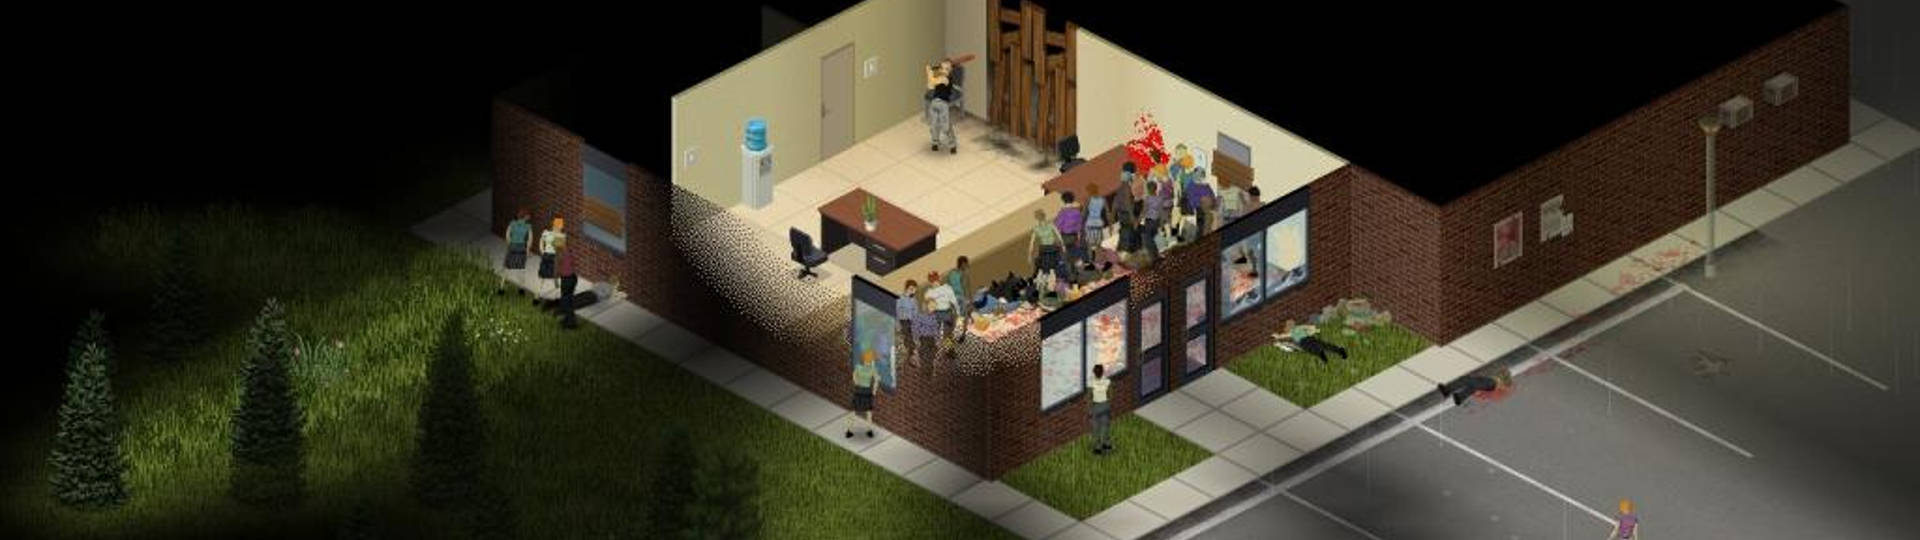 Project Zomboid B41 Multiplayer Test launch slice